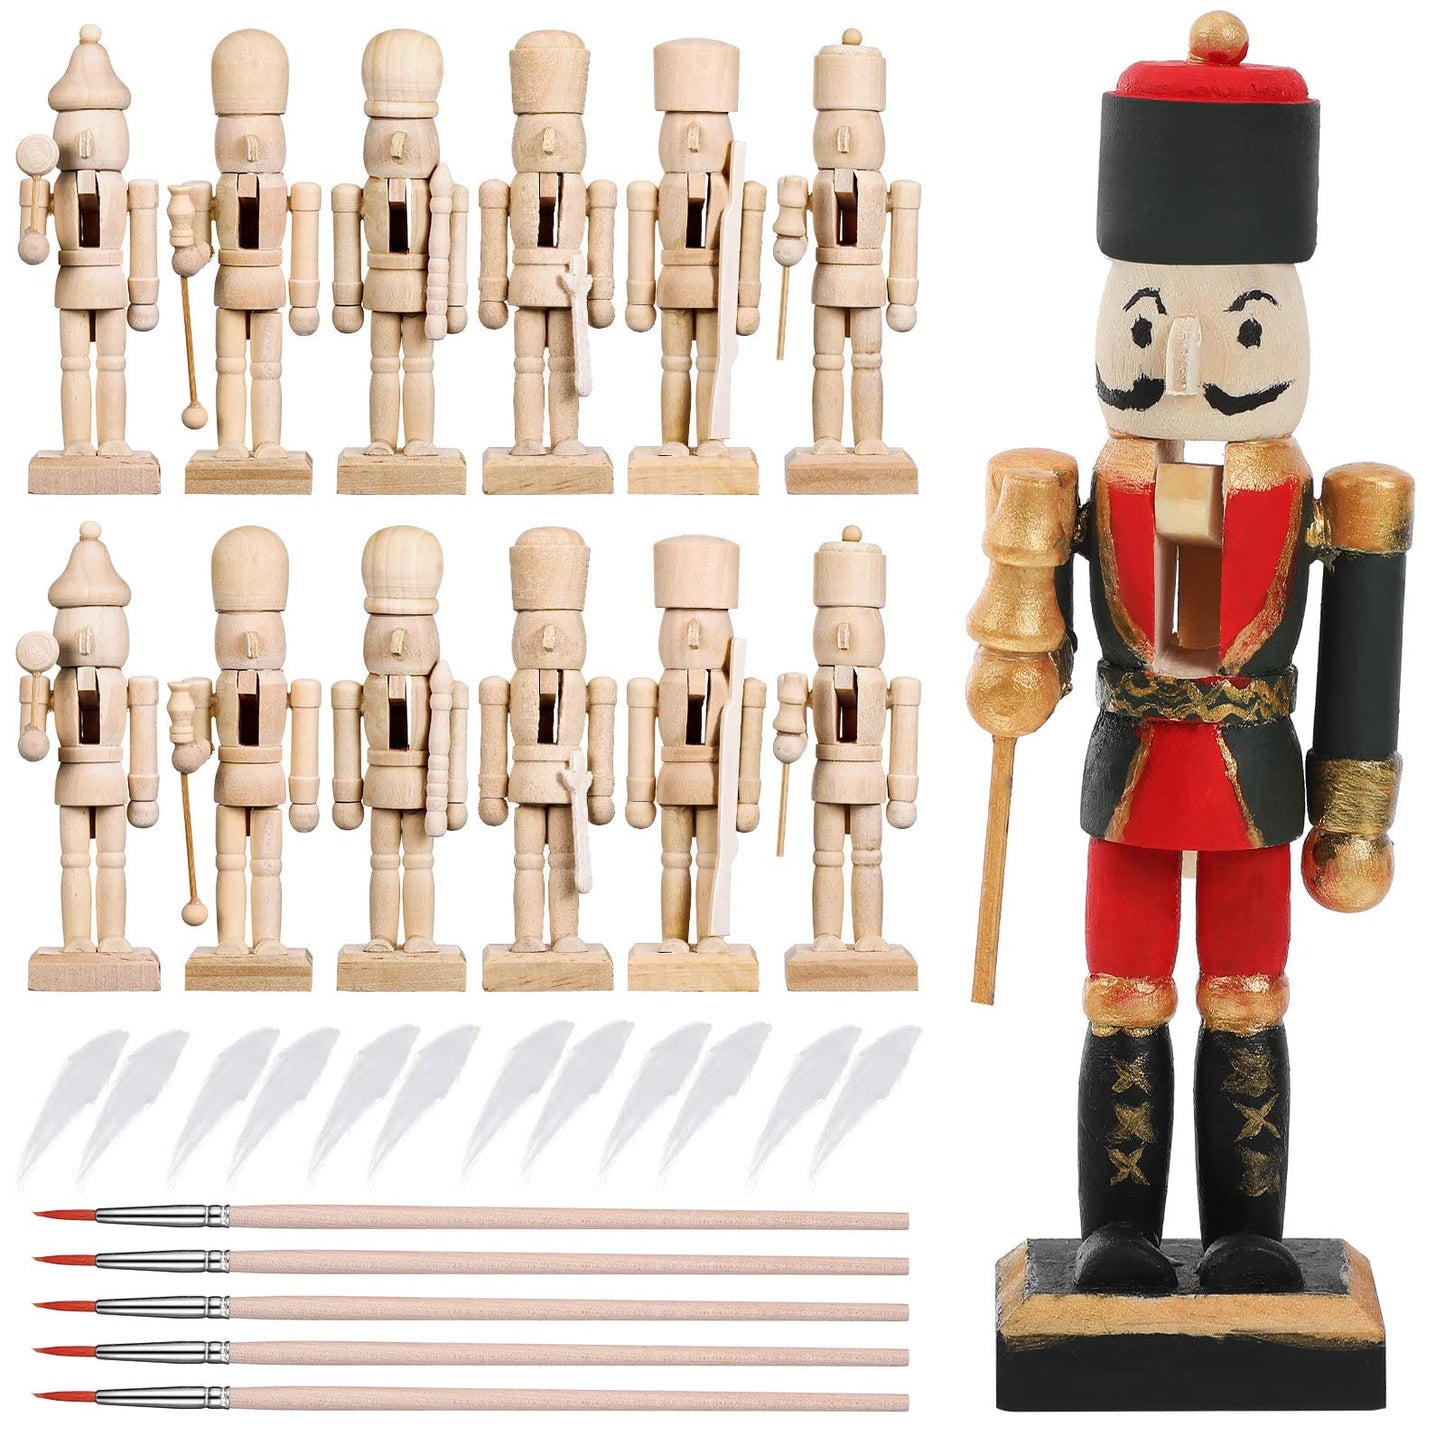 29 Pcs Christmas Wooden Unfinished Nutcracker Figures Nutcracker Ornament Kit Unpainted Nutcracker DIY Blank Paint Toy Nutcracker Soldier with Paint